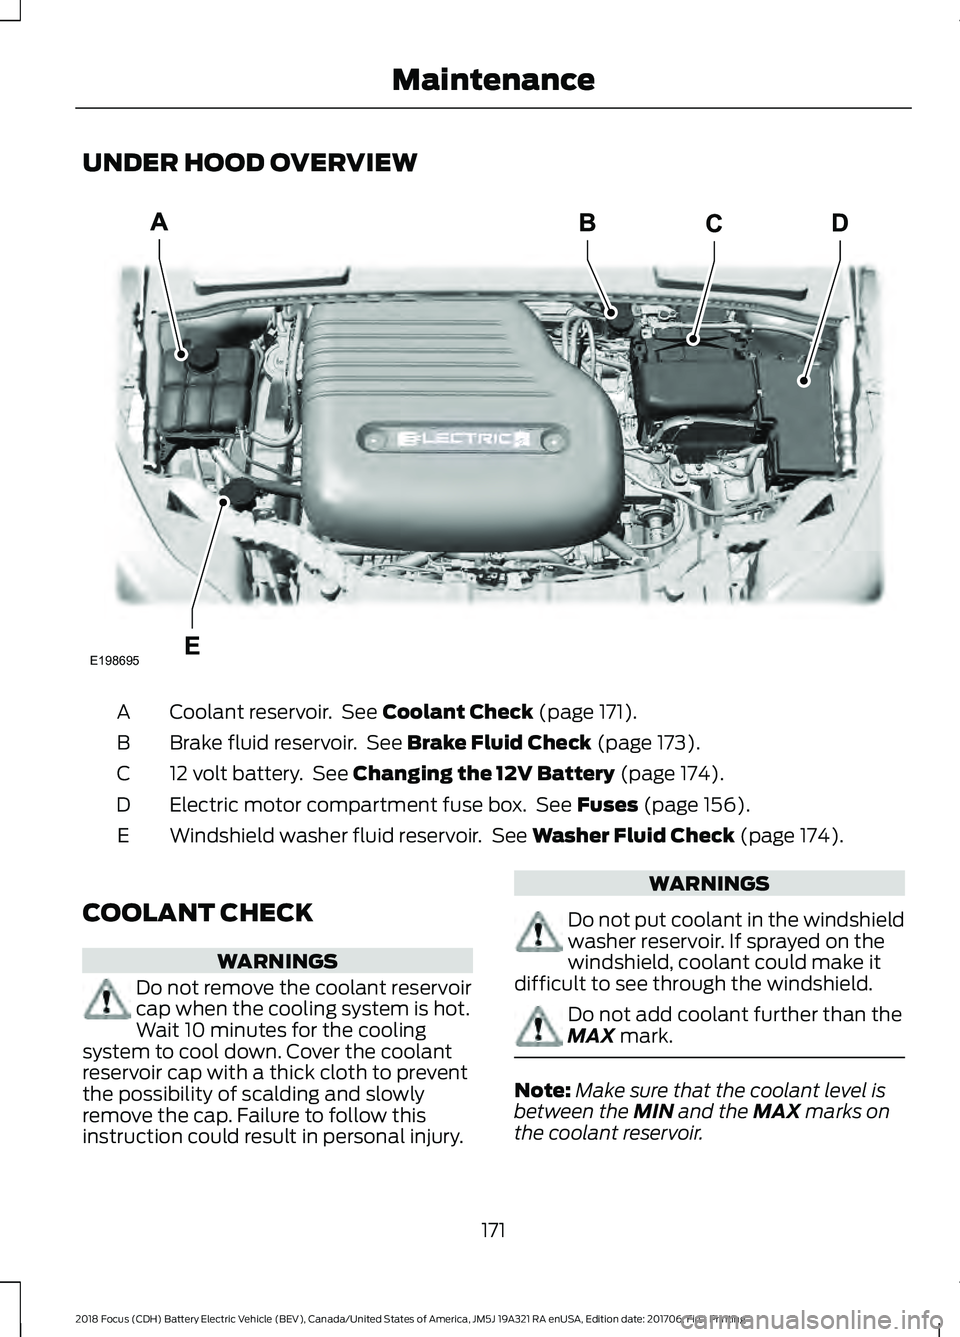 FORD FOCUS ELECTRIC 2018  Owners Manual UNDER HOOD OVERVIEW
Coolant reservoir.  See Coolant Check (page 171).
A
Brake fluid reservoir.  See 
Brake Fluid Check (page 173).
B
12 volt battery.  See 
Changing the 12V Battery (page 174).
C
Elect